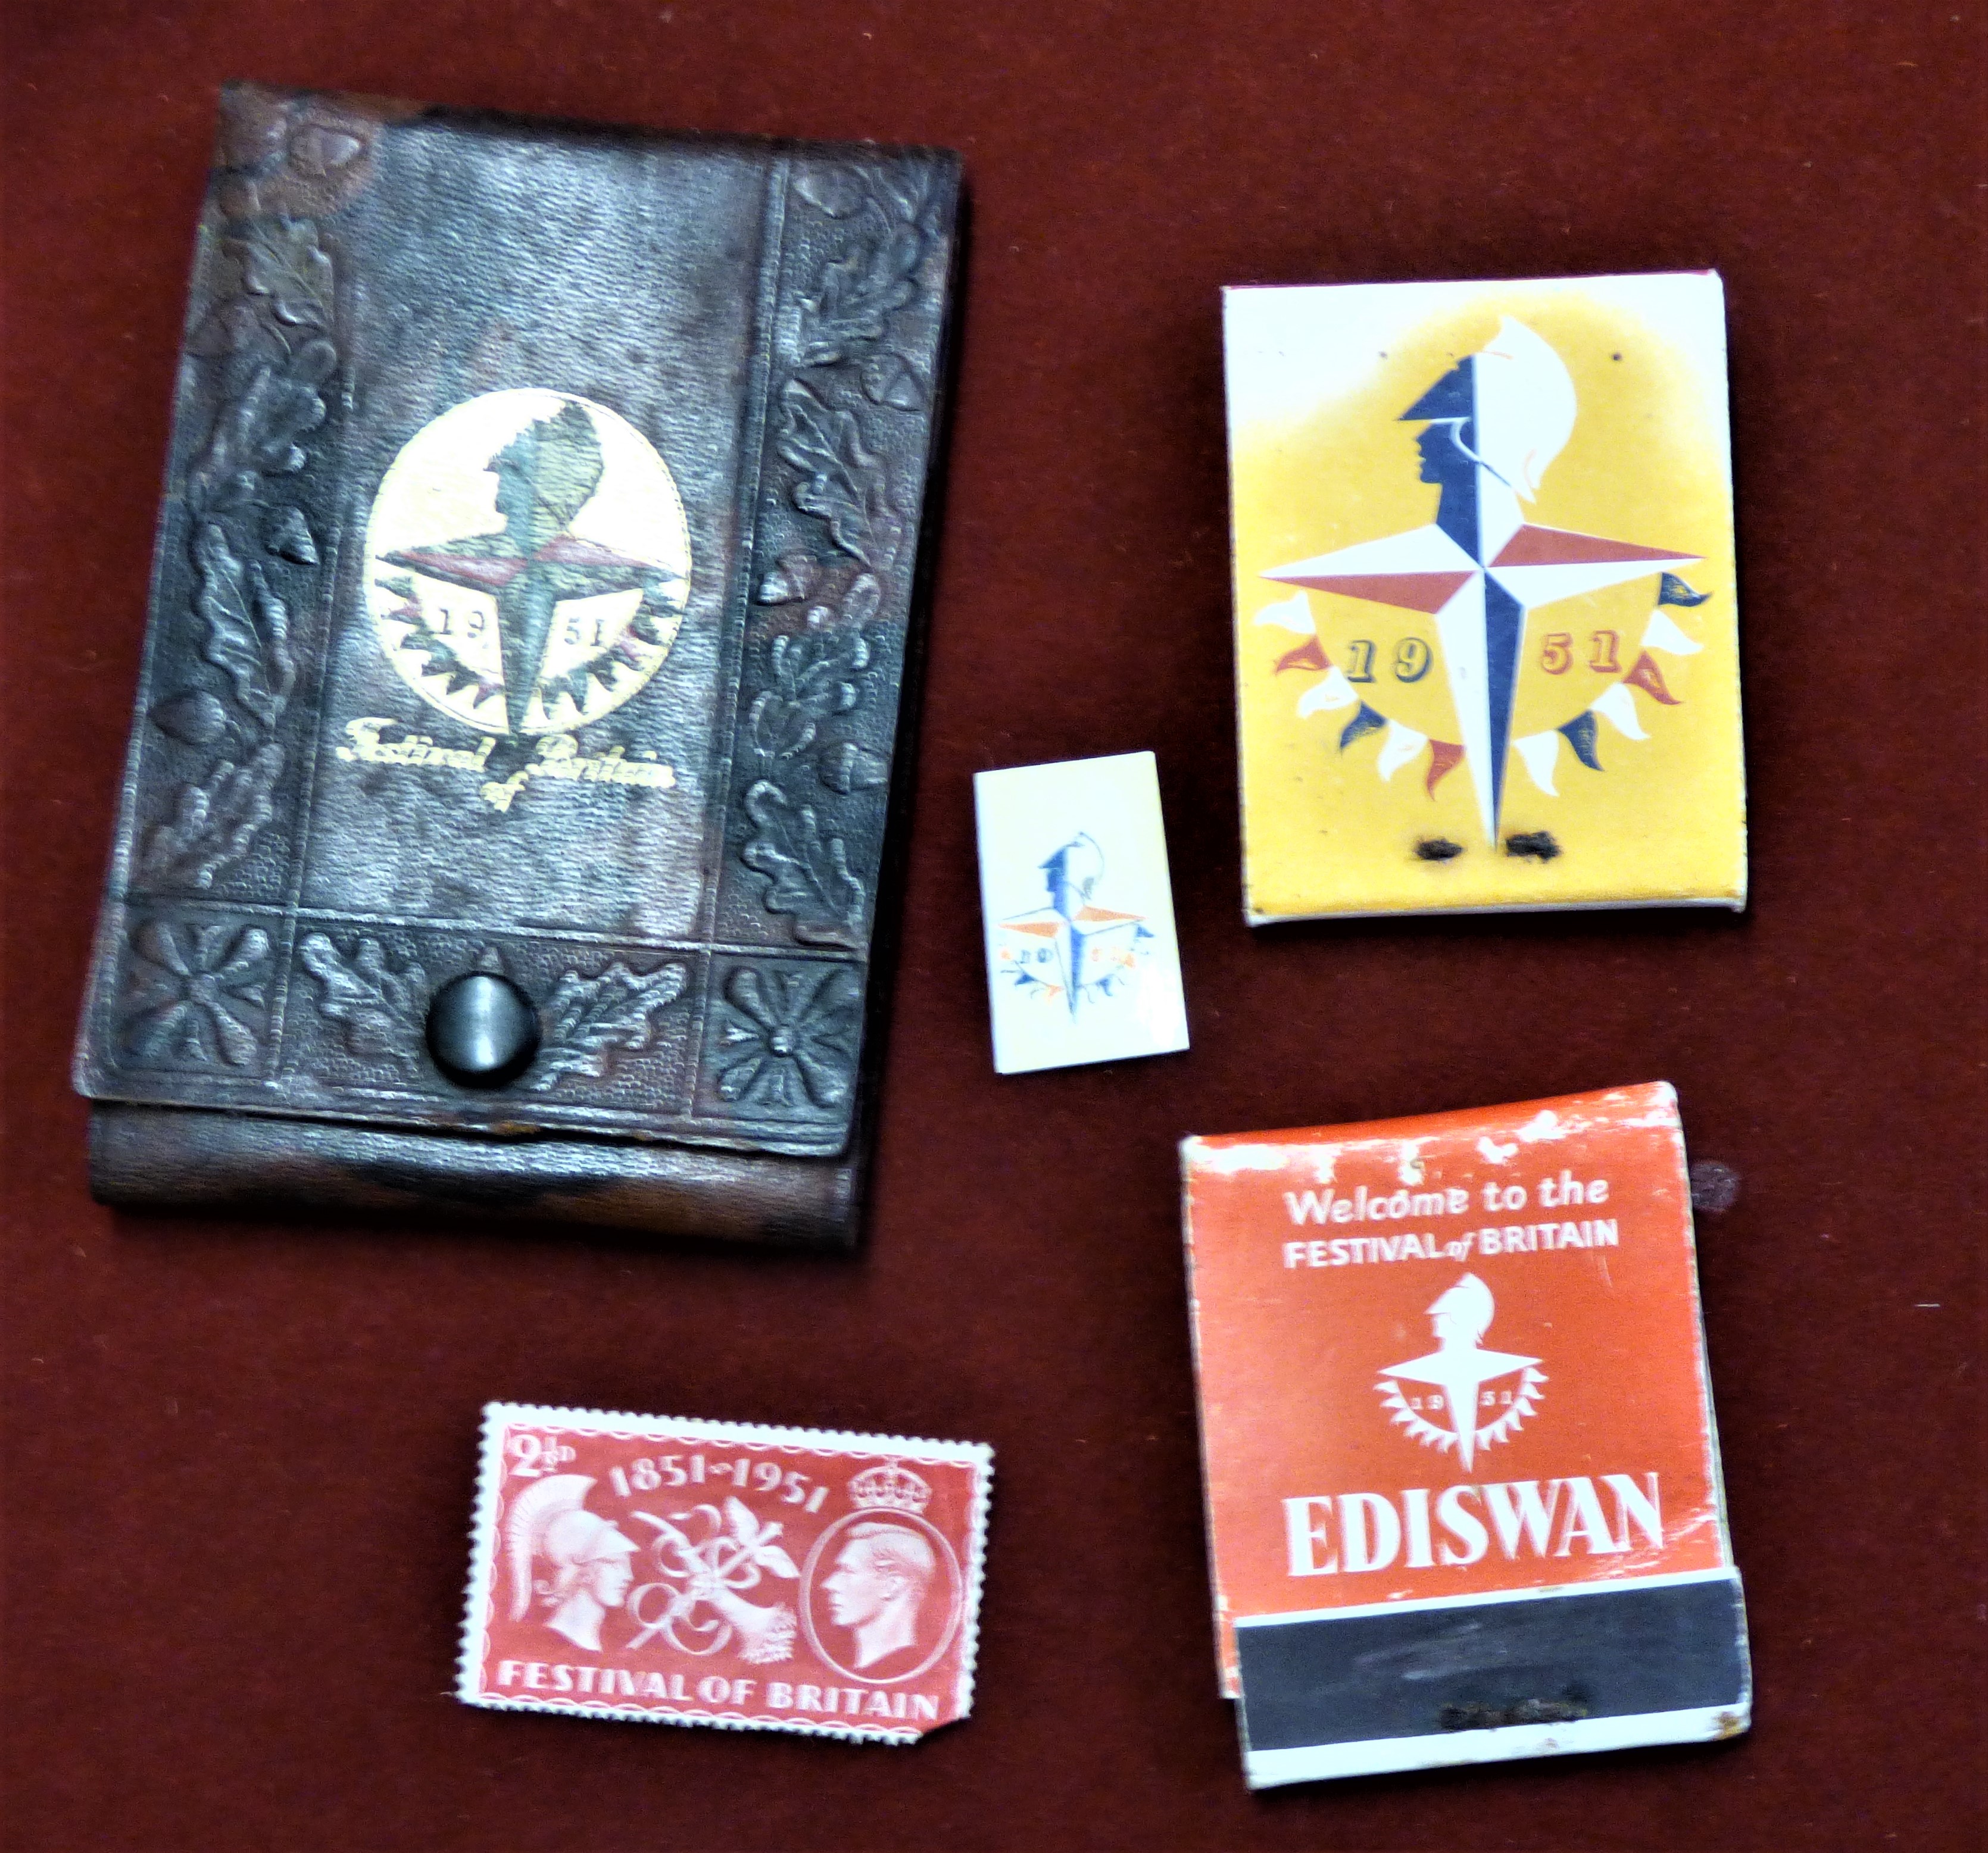 1951 Festival of Britain Matches (2) and leather pocket book for shopping lists. (3 items in total)